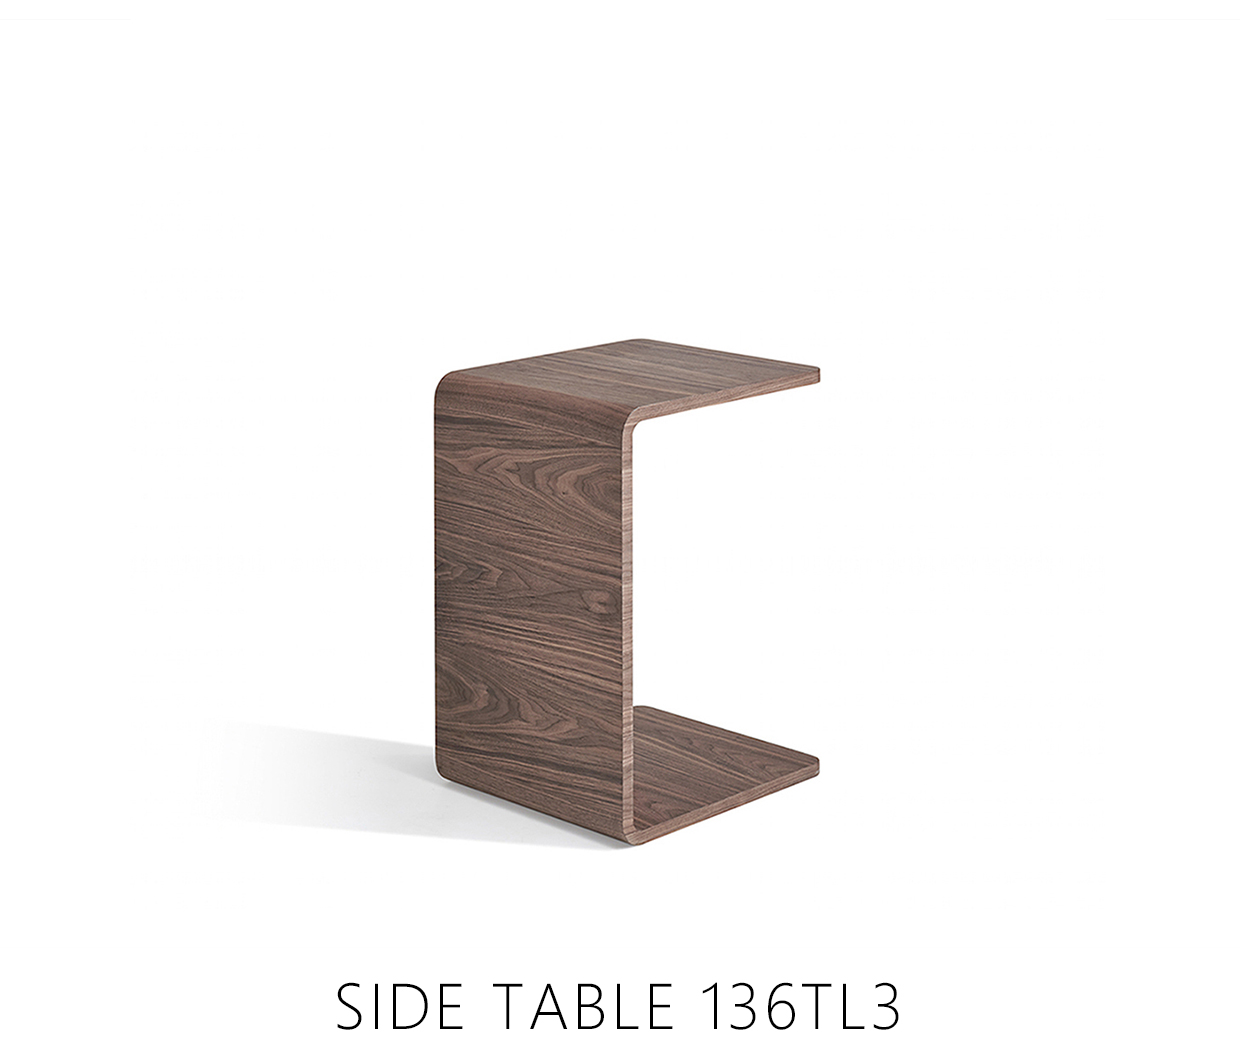 SIDE TABLE 136TL3